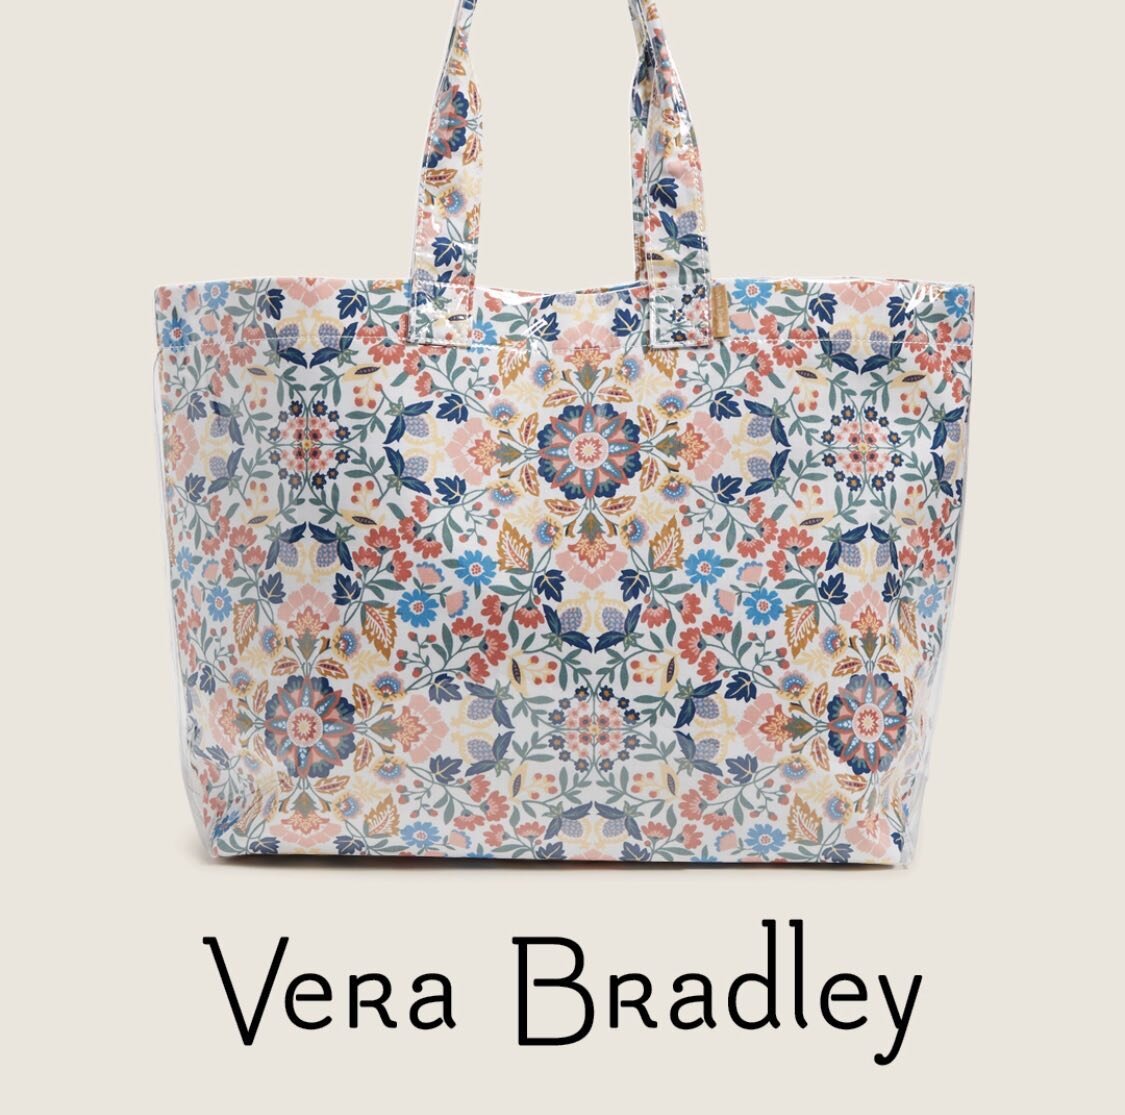 A Mother&rsquo;s Day FREE gift tote with every $50 full priced Vera Bradley sale. May 12-14 while supplies last! Cottagemonet.com @explorerockville @themocoshow  @rockvillechamber @rockvilletownsq #verabradley #mothersday #totebags # shopsmall